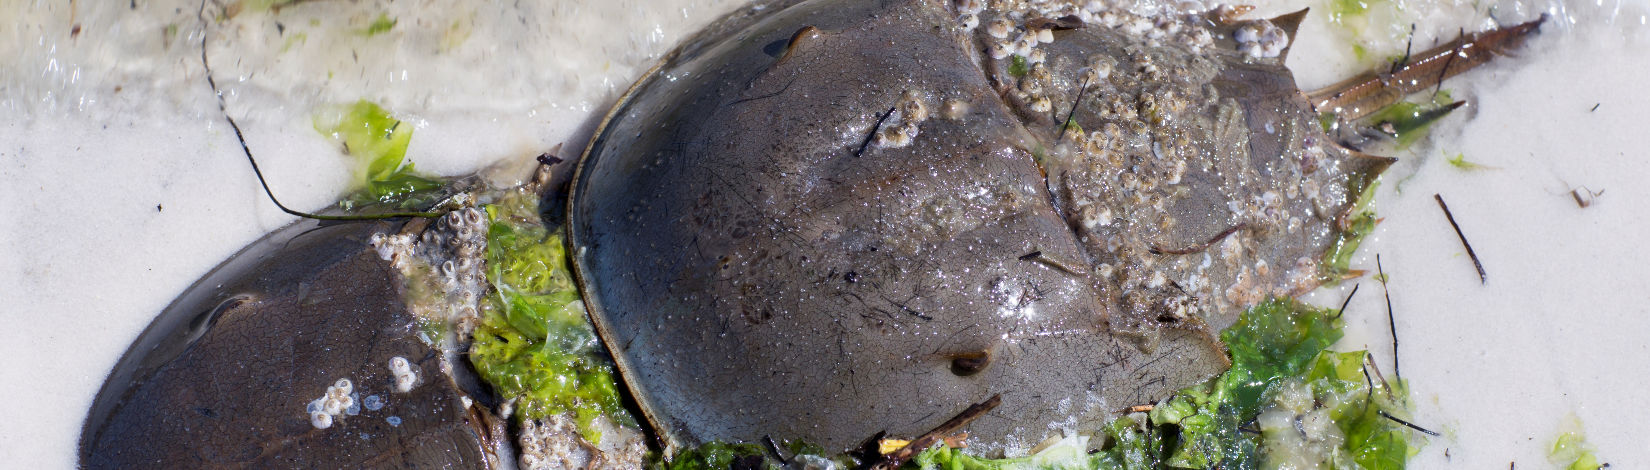 A pair of horseshoe crabs having a tender moment